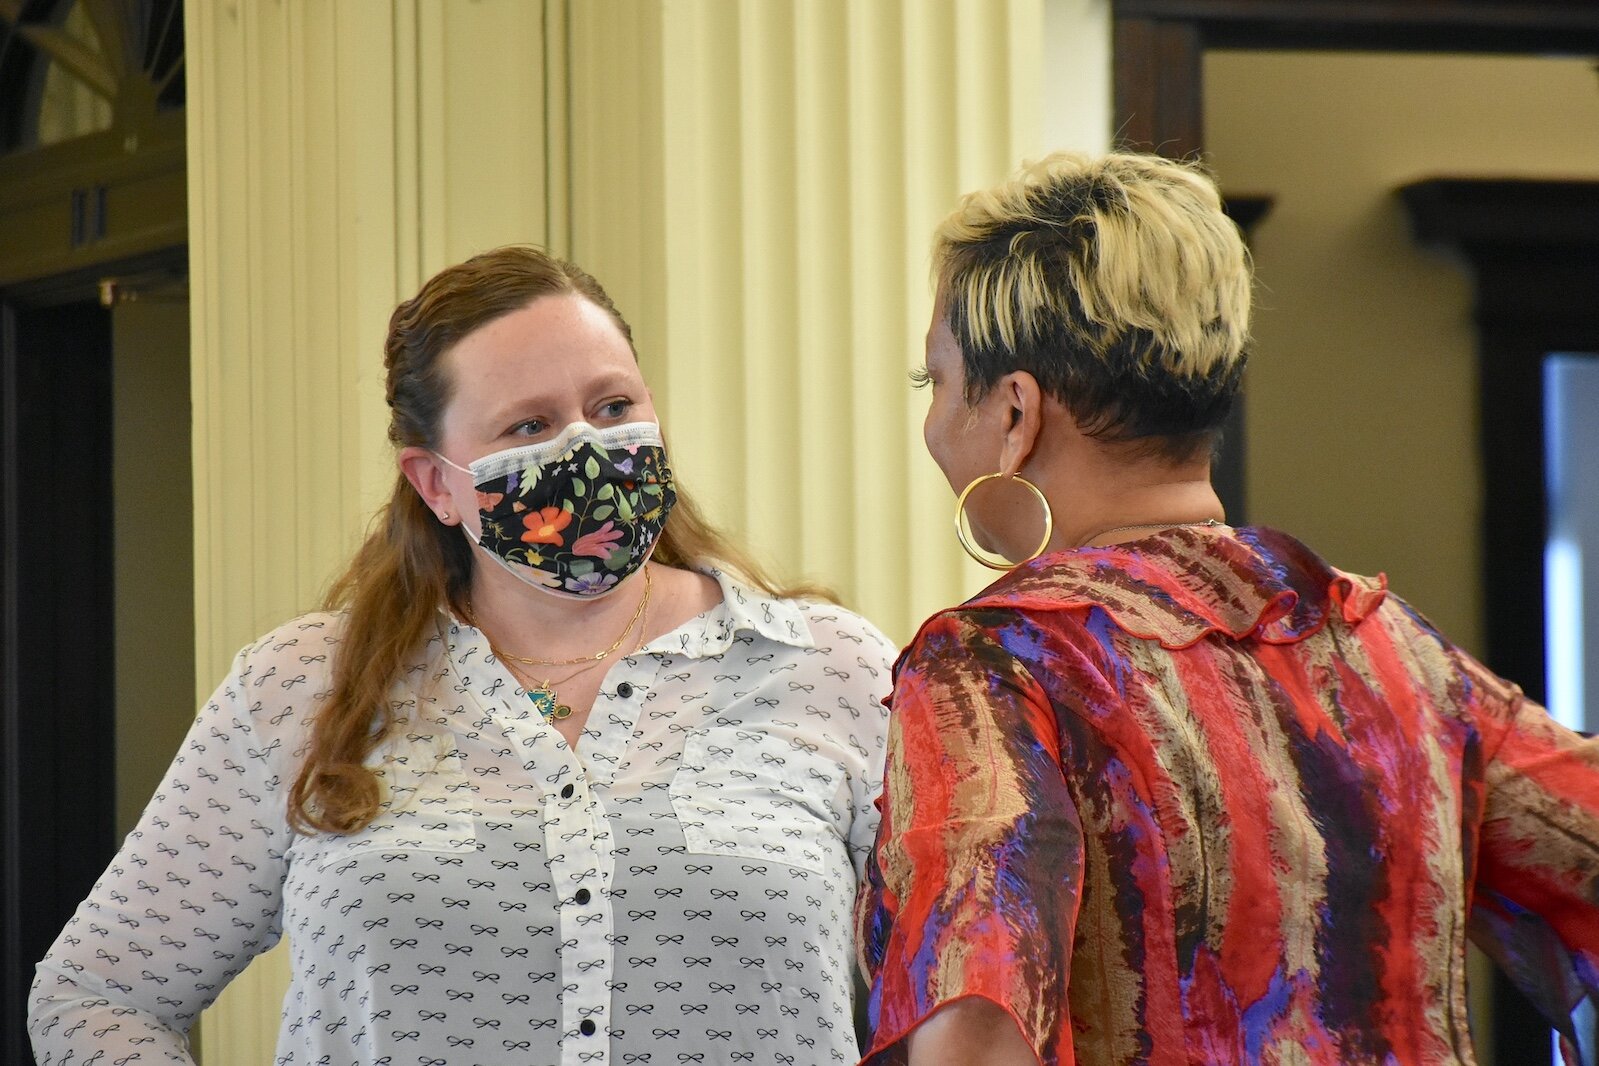 Kaytee Faris, Battle Creek City Commission member and Vice Mayor, talks with fellow Commission member Carla Reynolds prior to a recent meeting.